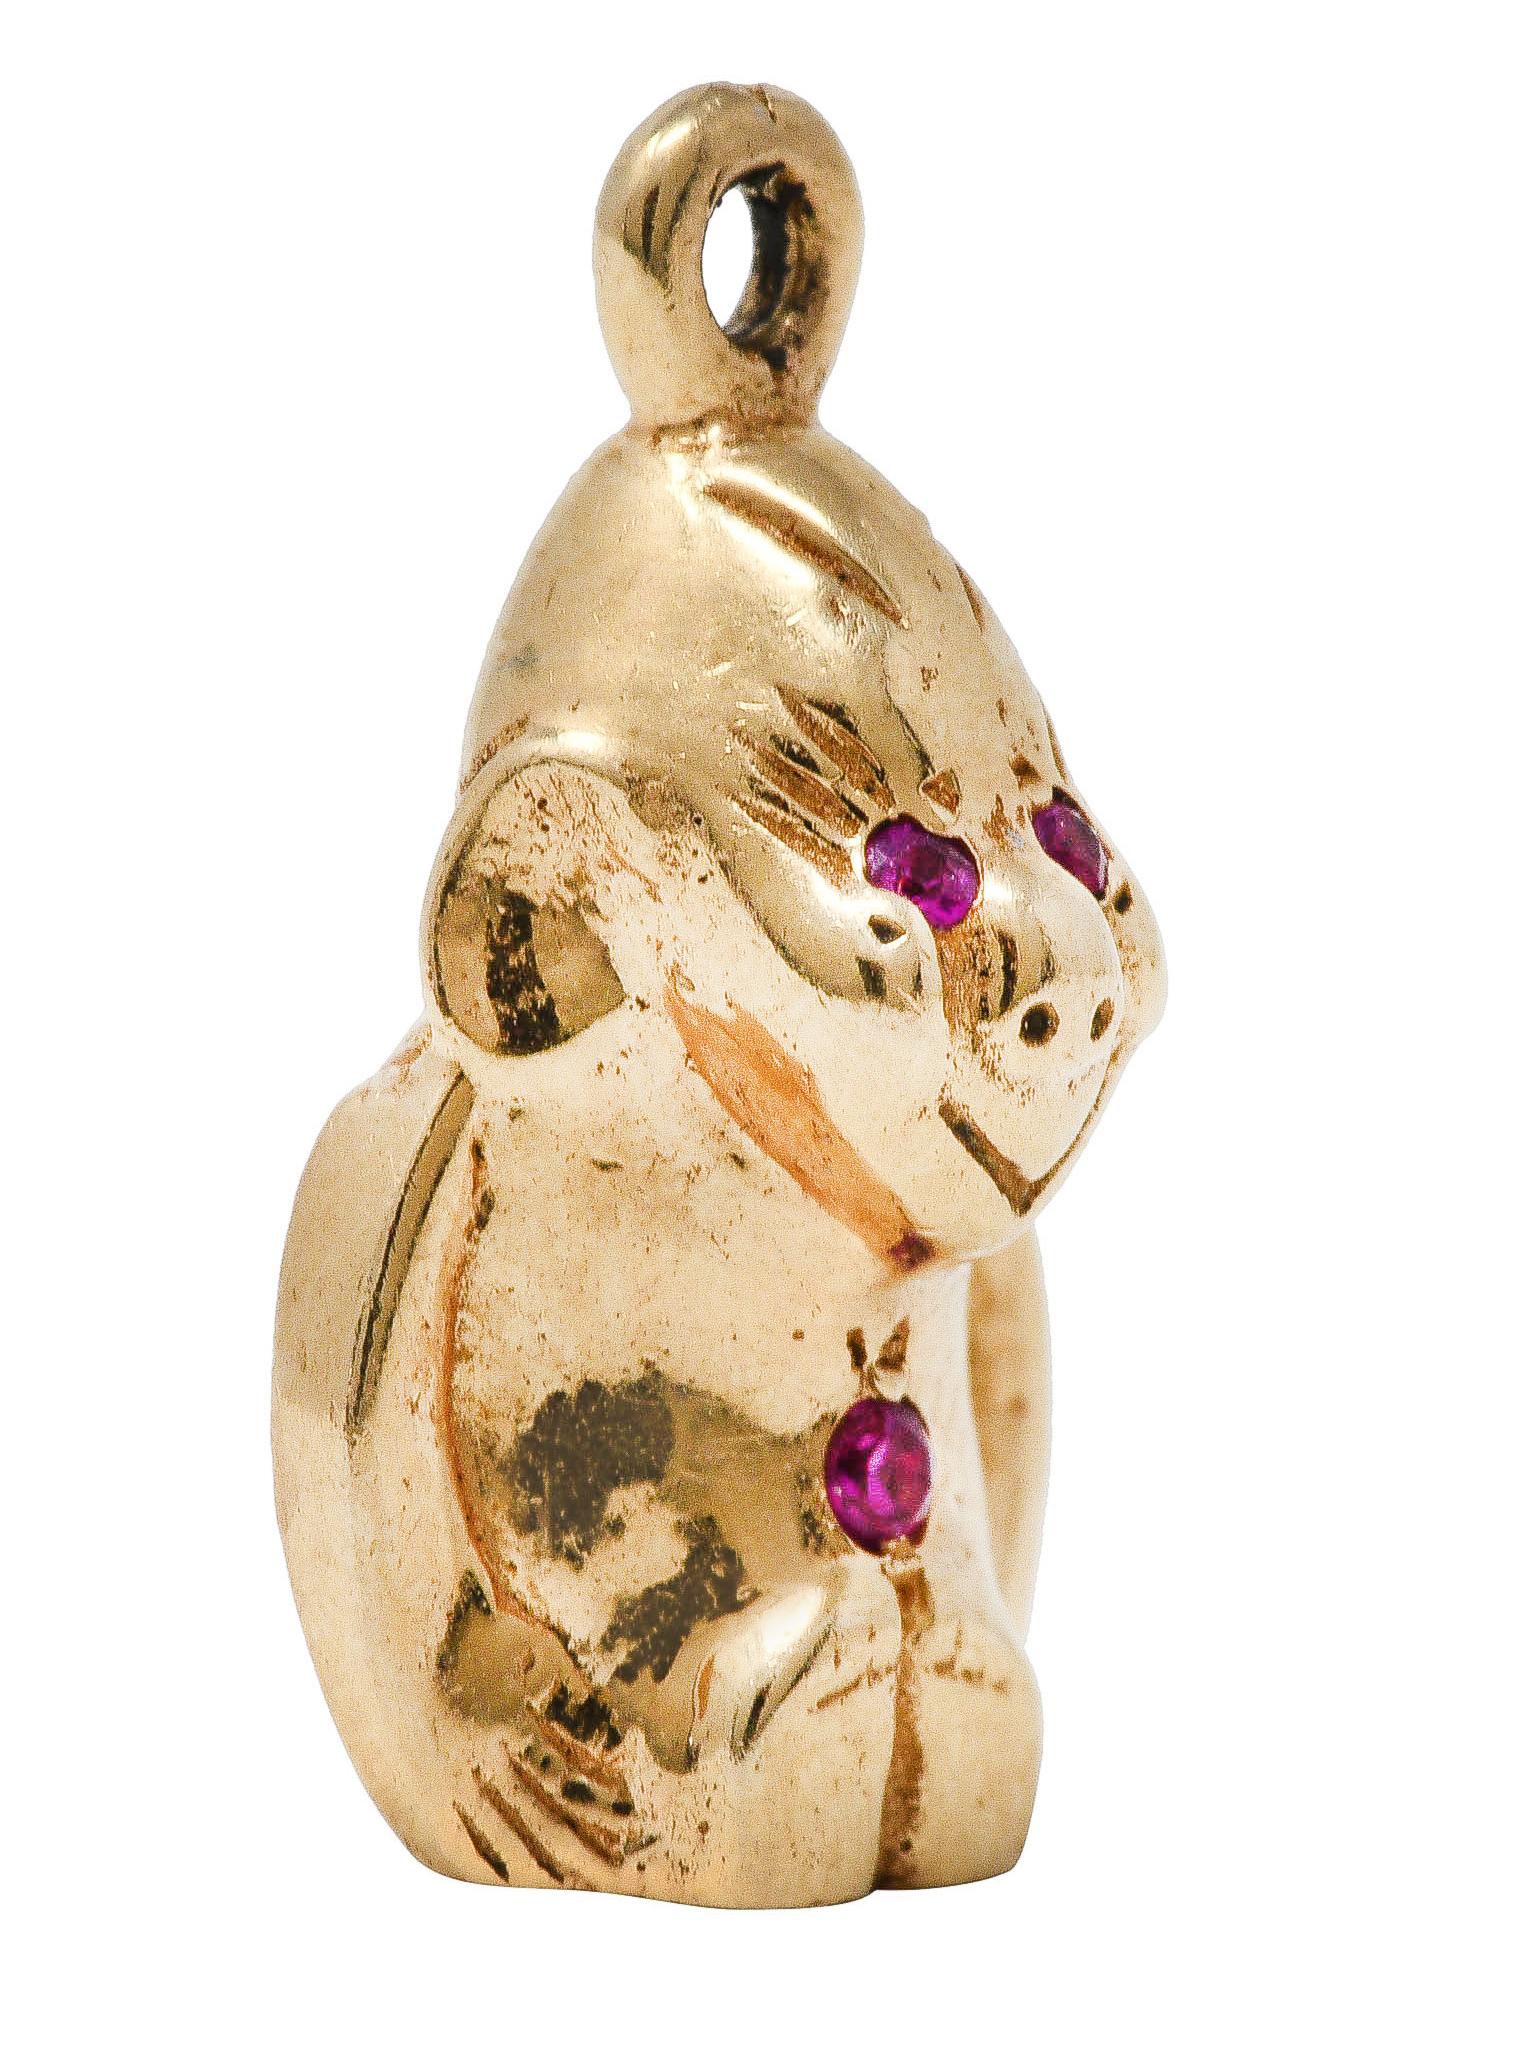 Designed as stylized sitting gorilla with carved features

Accented by three round cut rubies - well matched and bright

Completed by bale

Tested as 14 karat gold

Circa: 1940's

Measures: 3/8 x 6/8 inch

Total weight: 5.0 grams

Cheeky. Saucy.